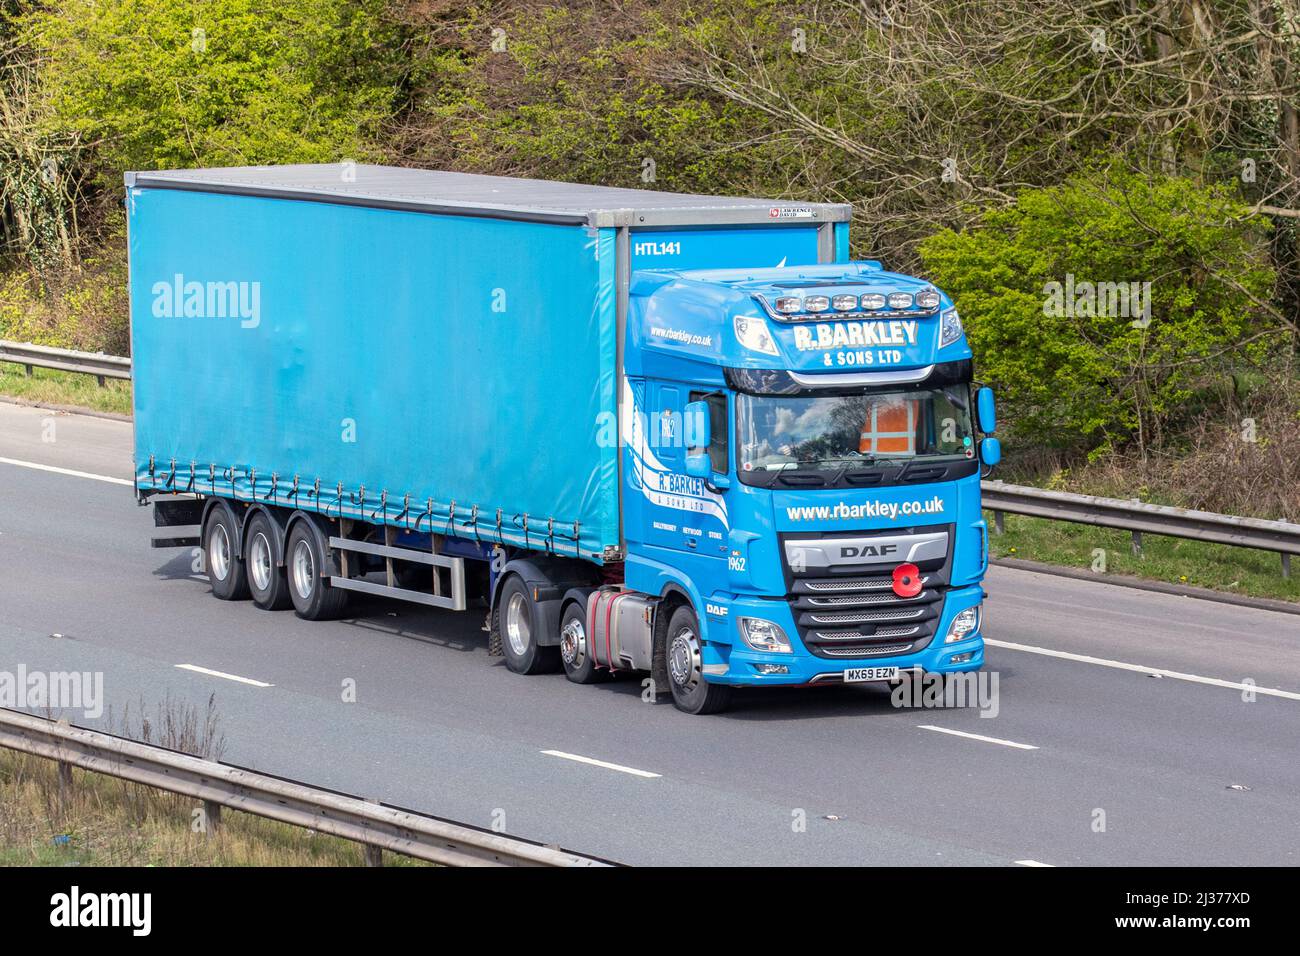 R Barkley & Sons Ltd DAF XF curtain-sided lorry ,curtainsider, tautliner, curtainsided, curtainside trailers driving on the M61 in Manchester, UJK Stock Photo